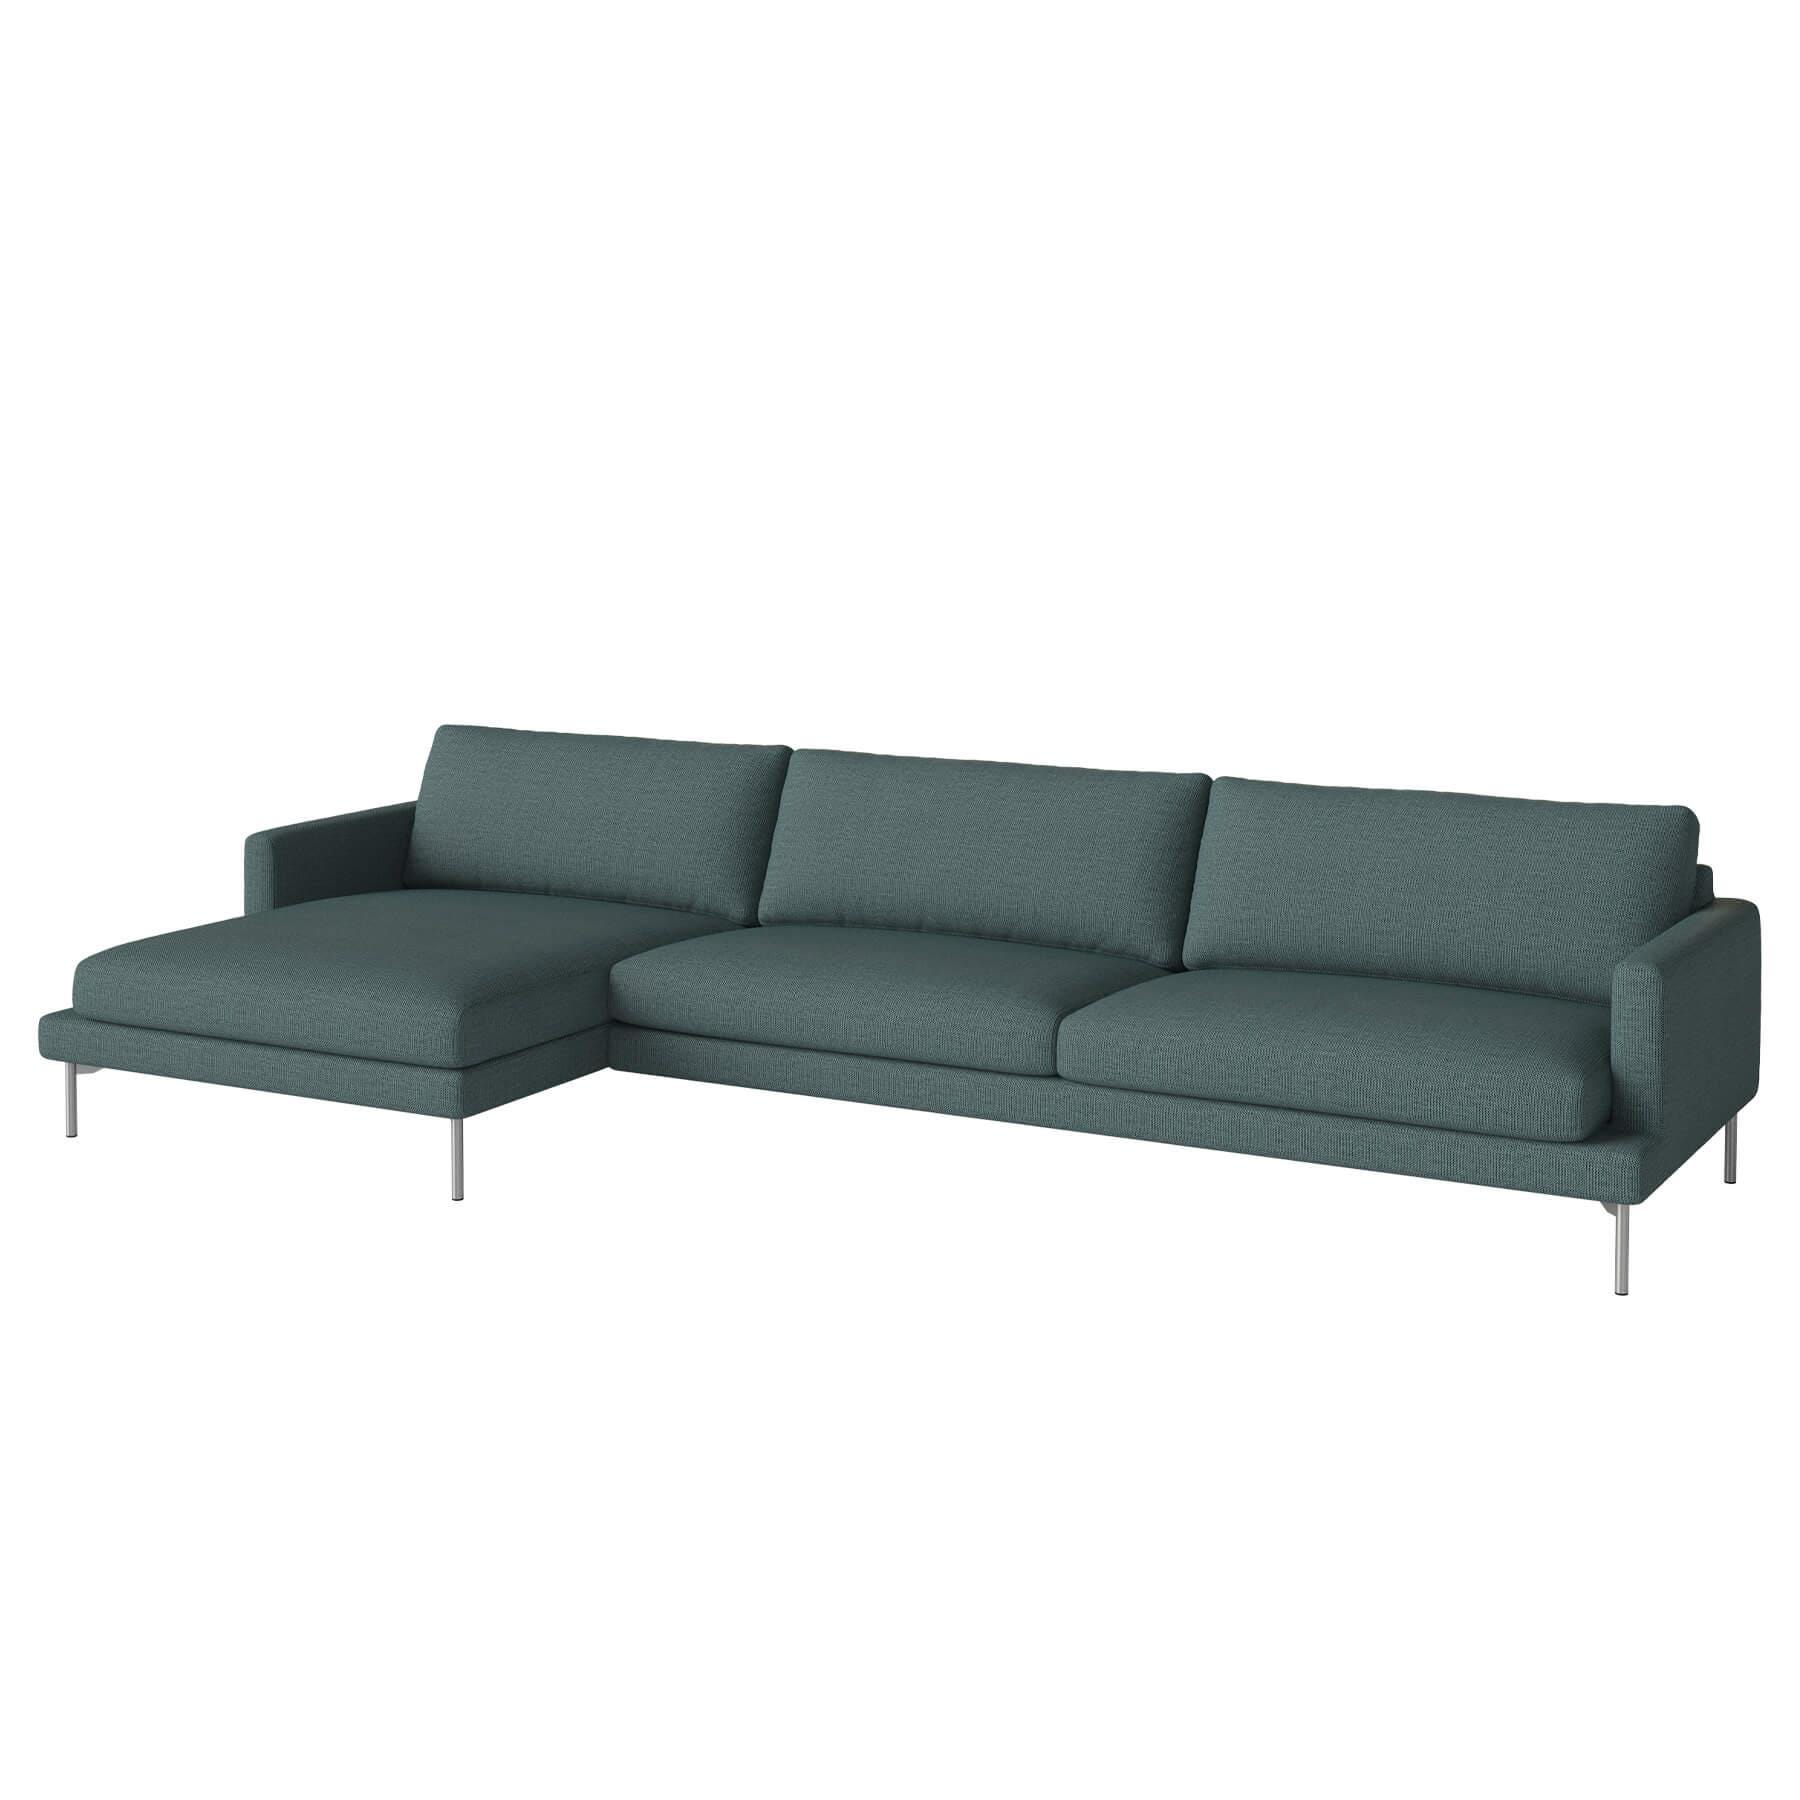 Bolia Veneda Sofa 45 Seater Sofa With Chaise Longue Brushed Steel London Sea Green Left Green Designer Furniture From Holloways Of Ludlow